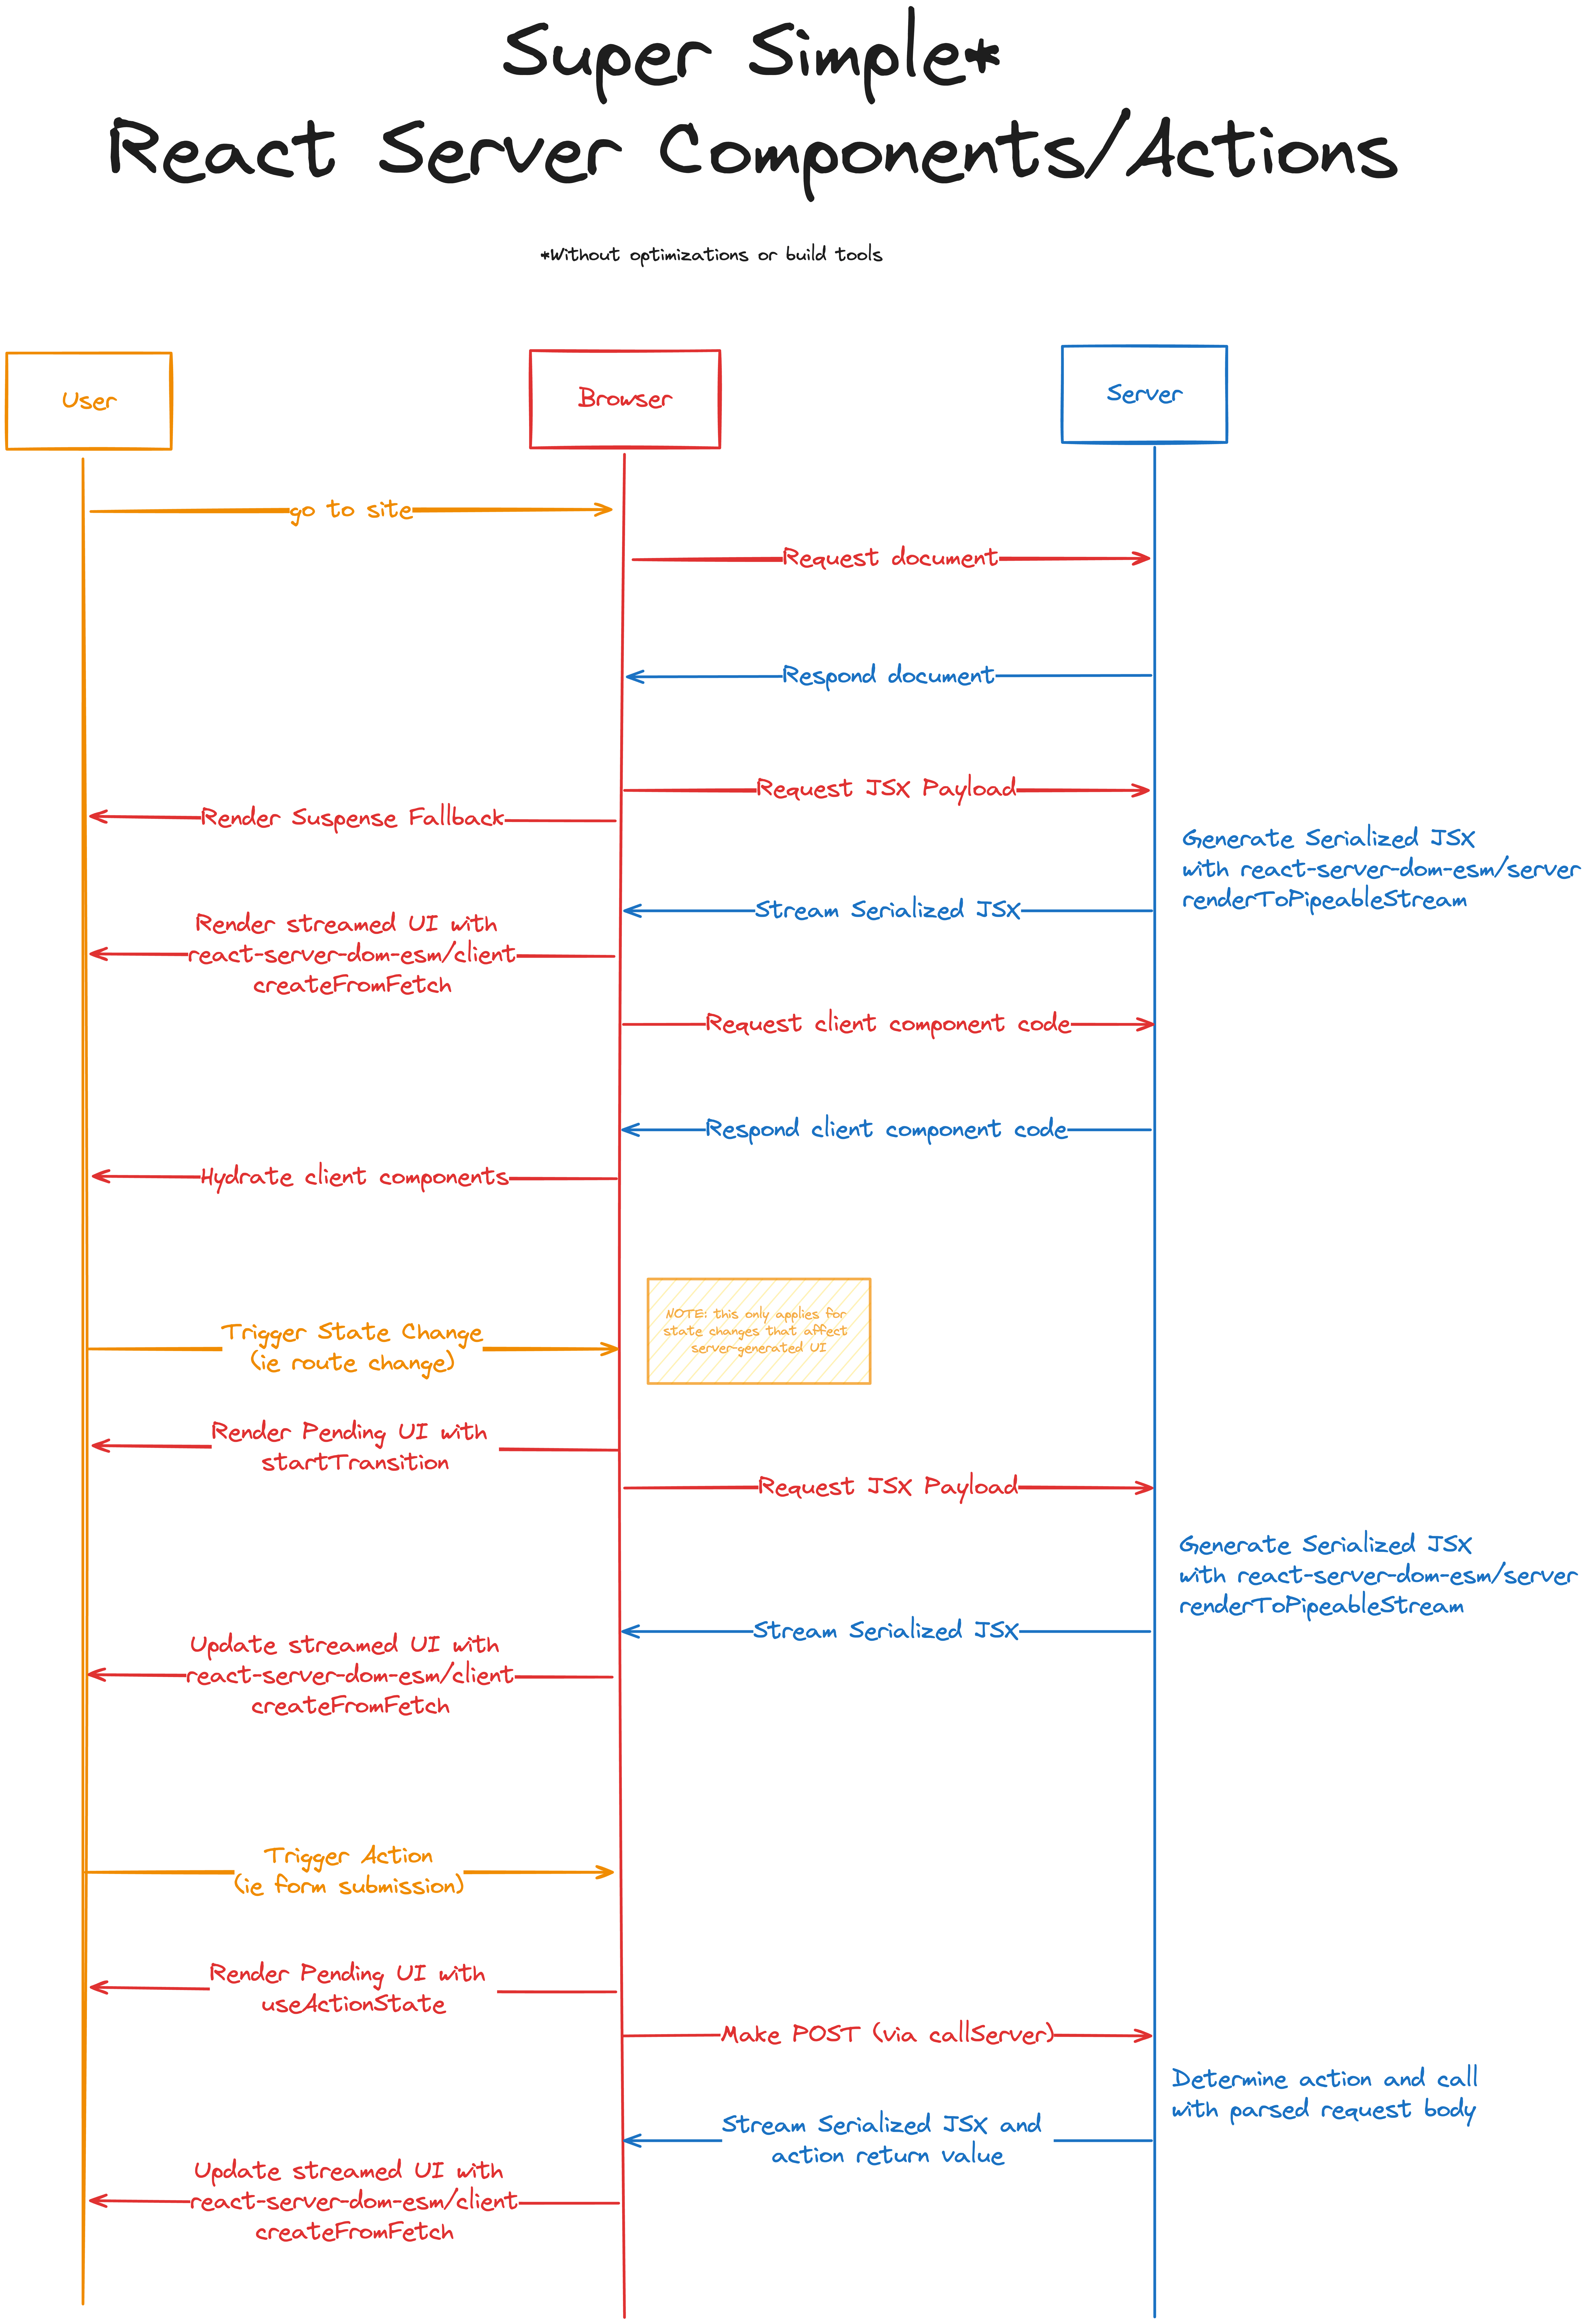 A flowchart for React Server Components and actions as described below